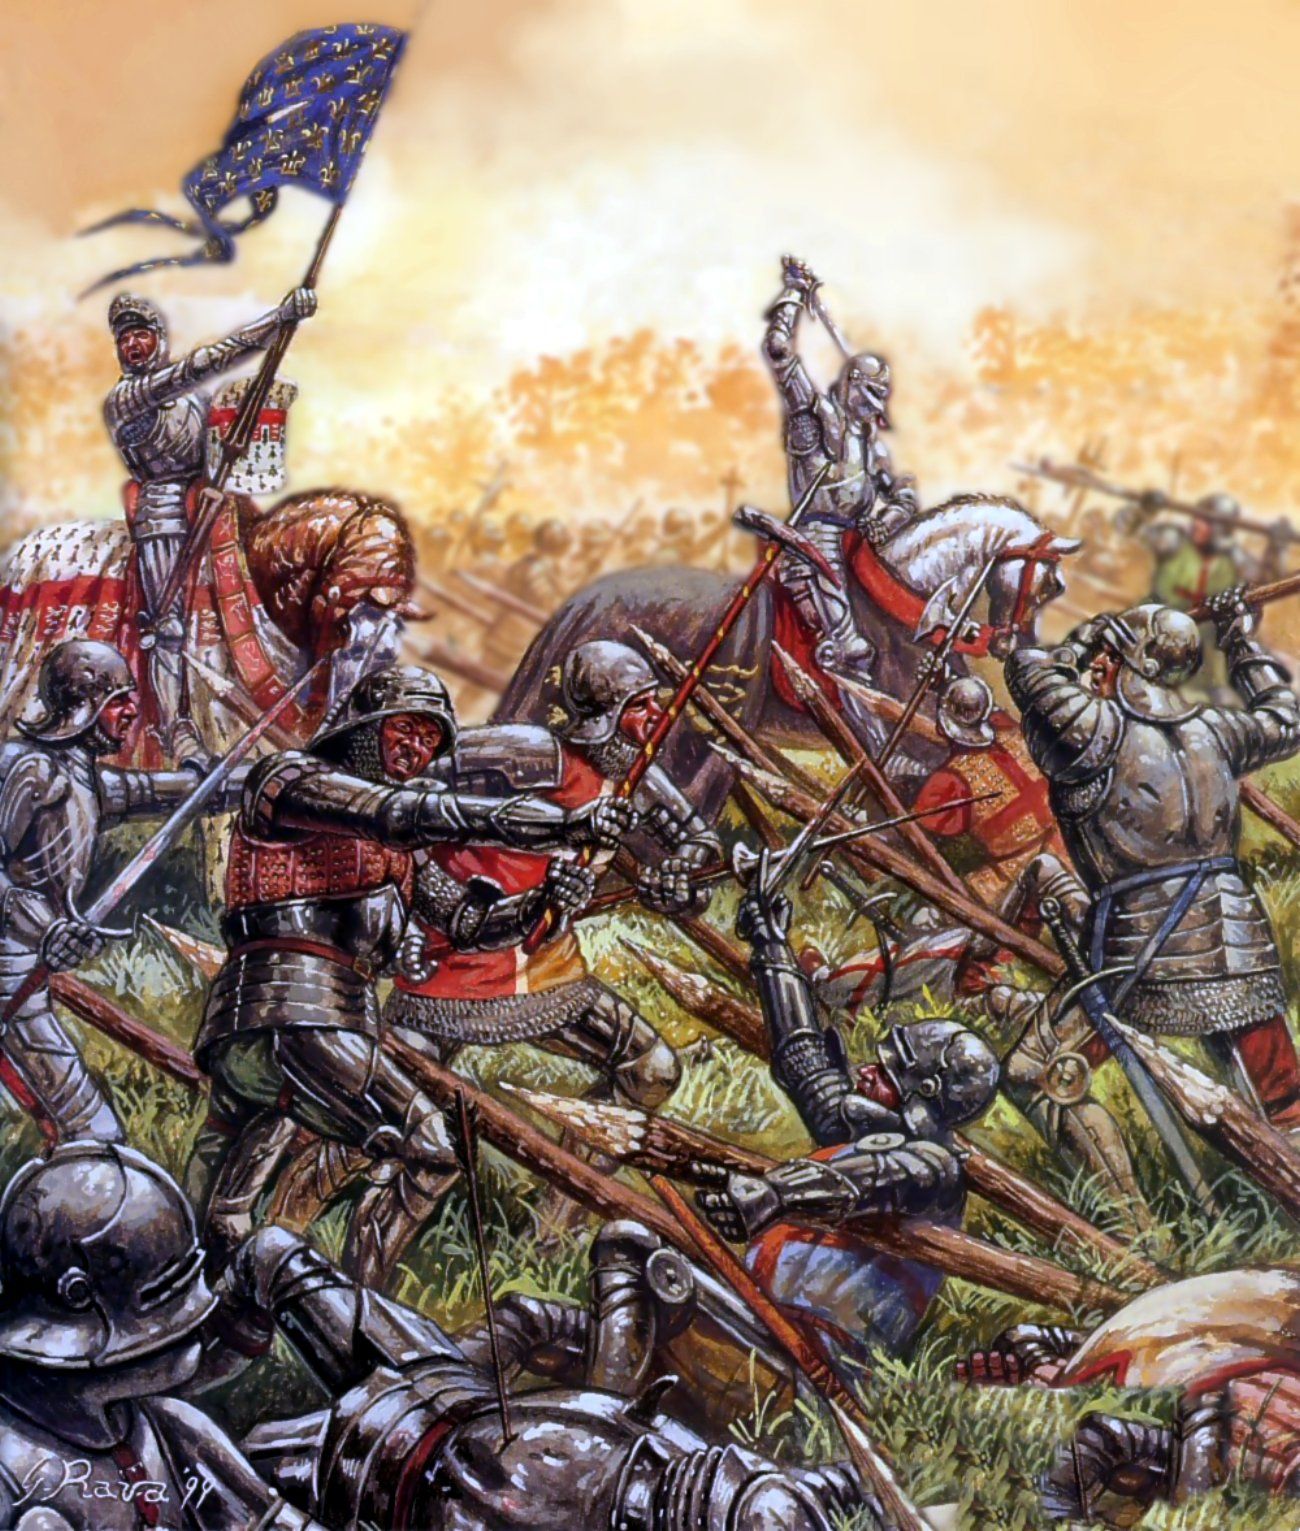 Aristocratic Fury on X: The French knights fought bravely! Their